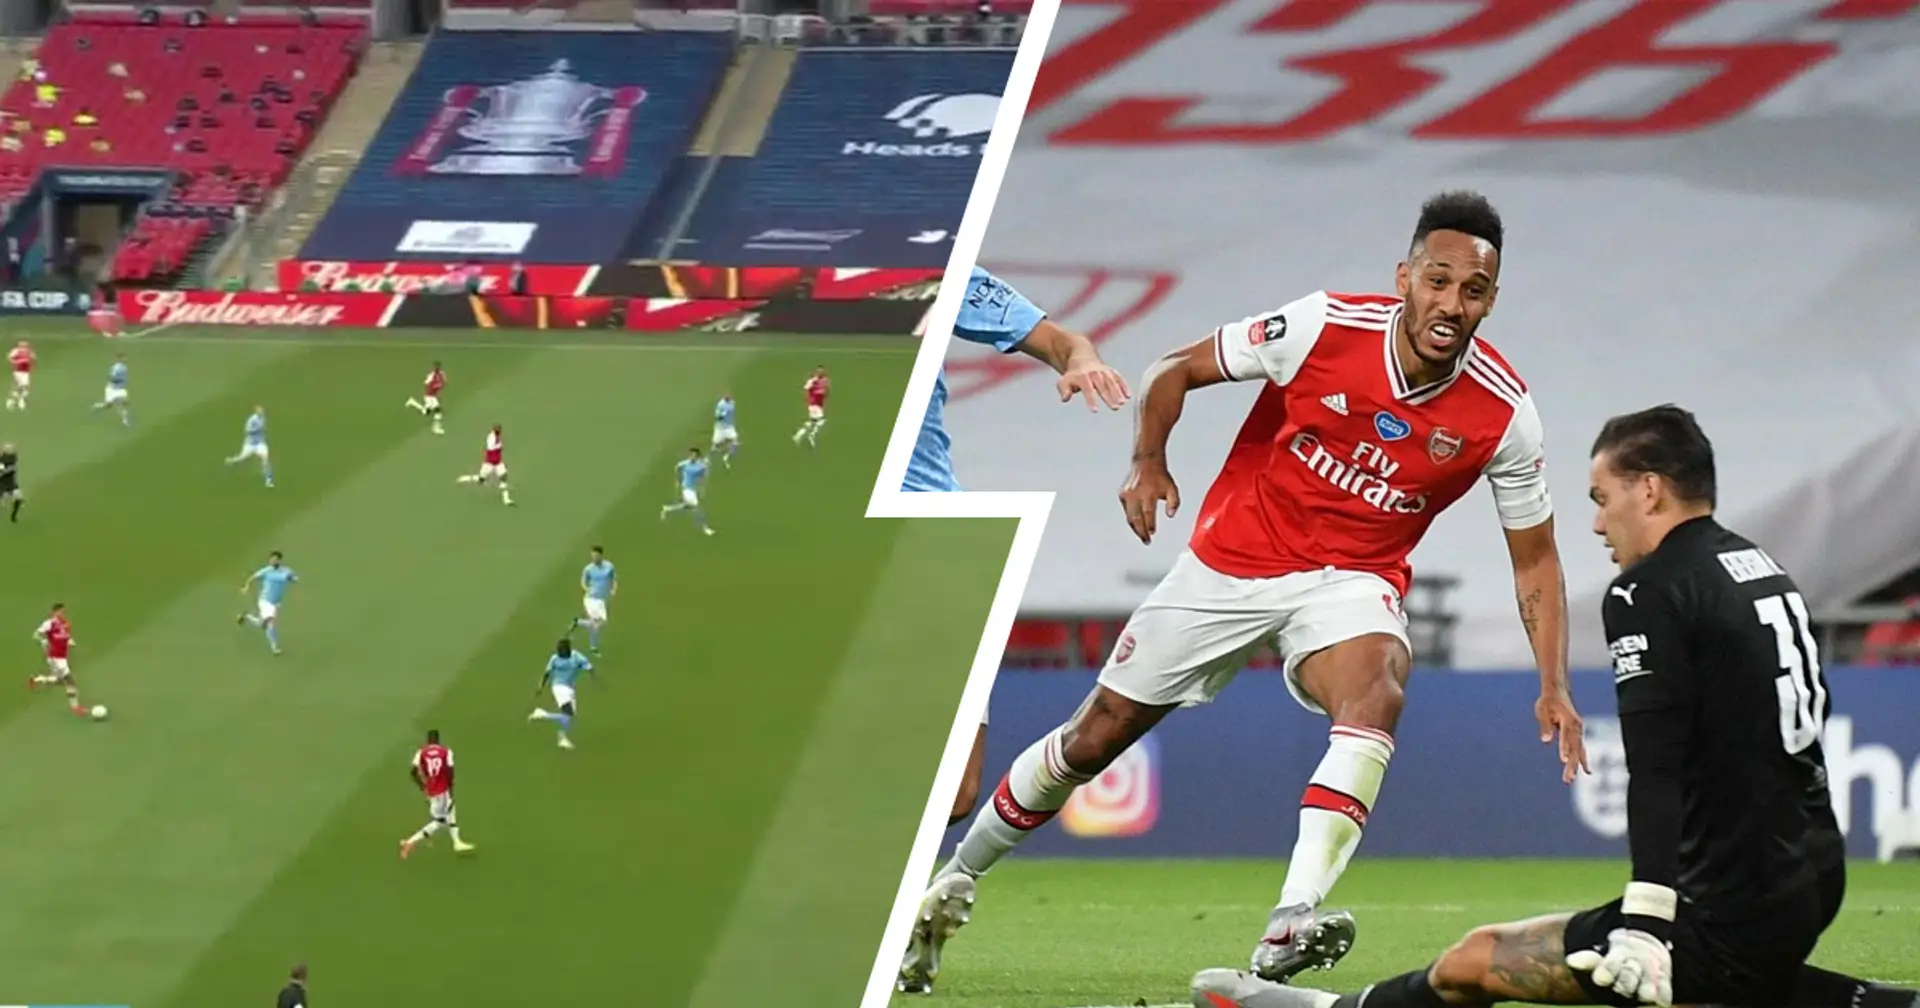 Throwback to our last meeting vs Man City: Auba's double seals win for us (video)